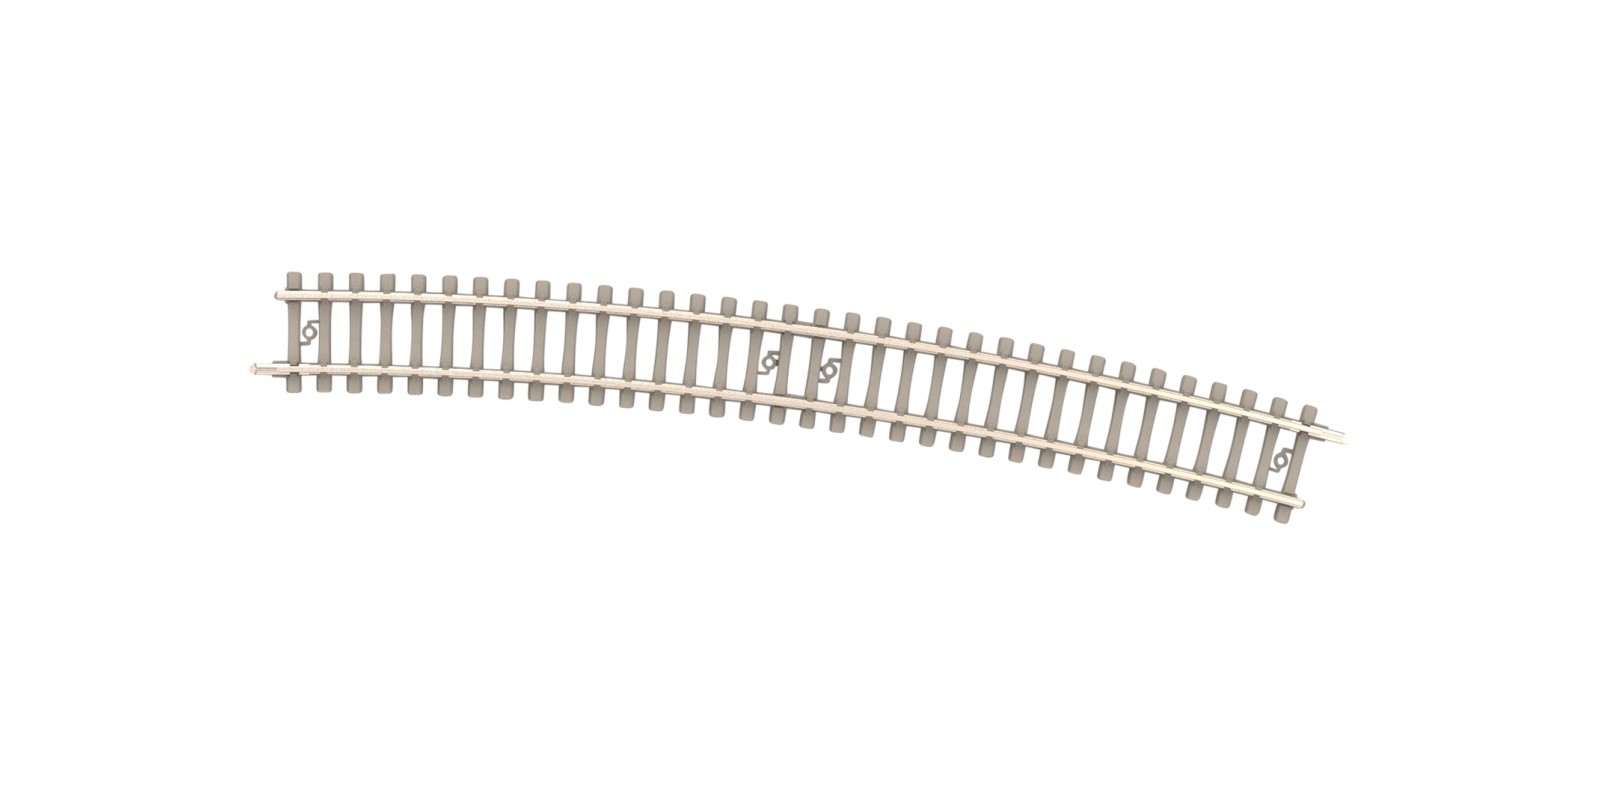 T14528 Curved Track with Concrete Ties